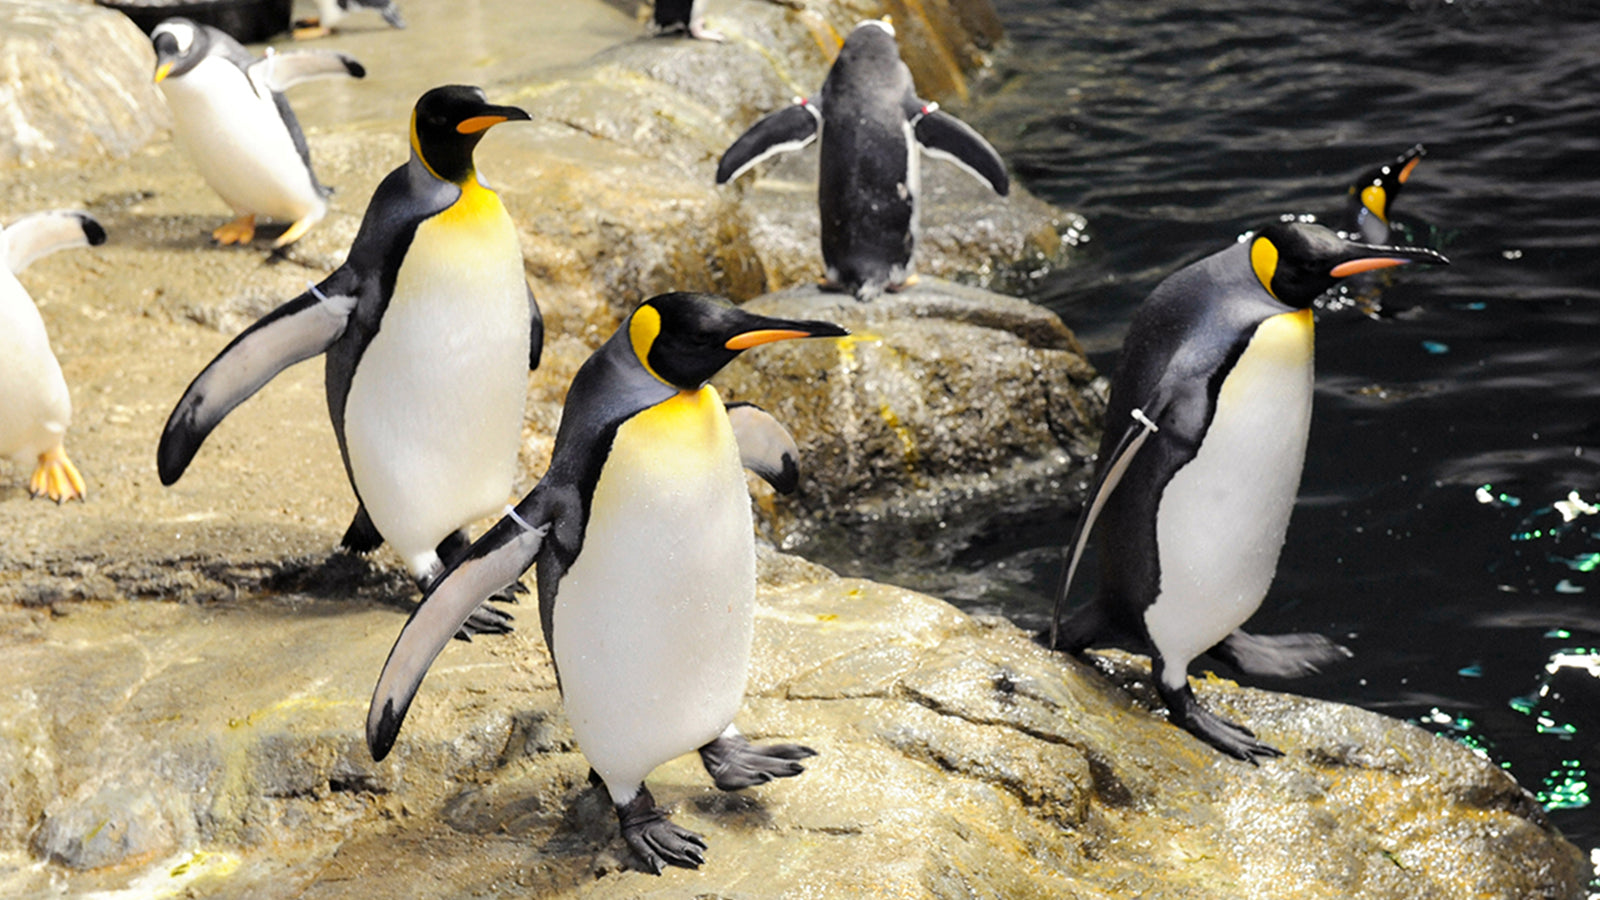 A group of penguins stand on rocks at the waters edge.